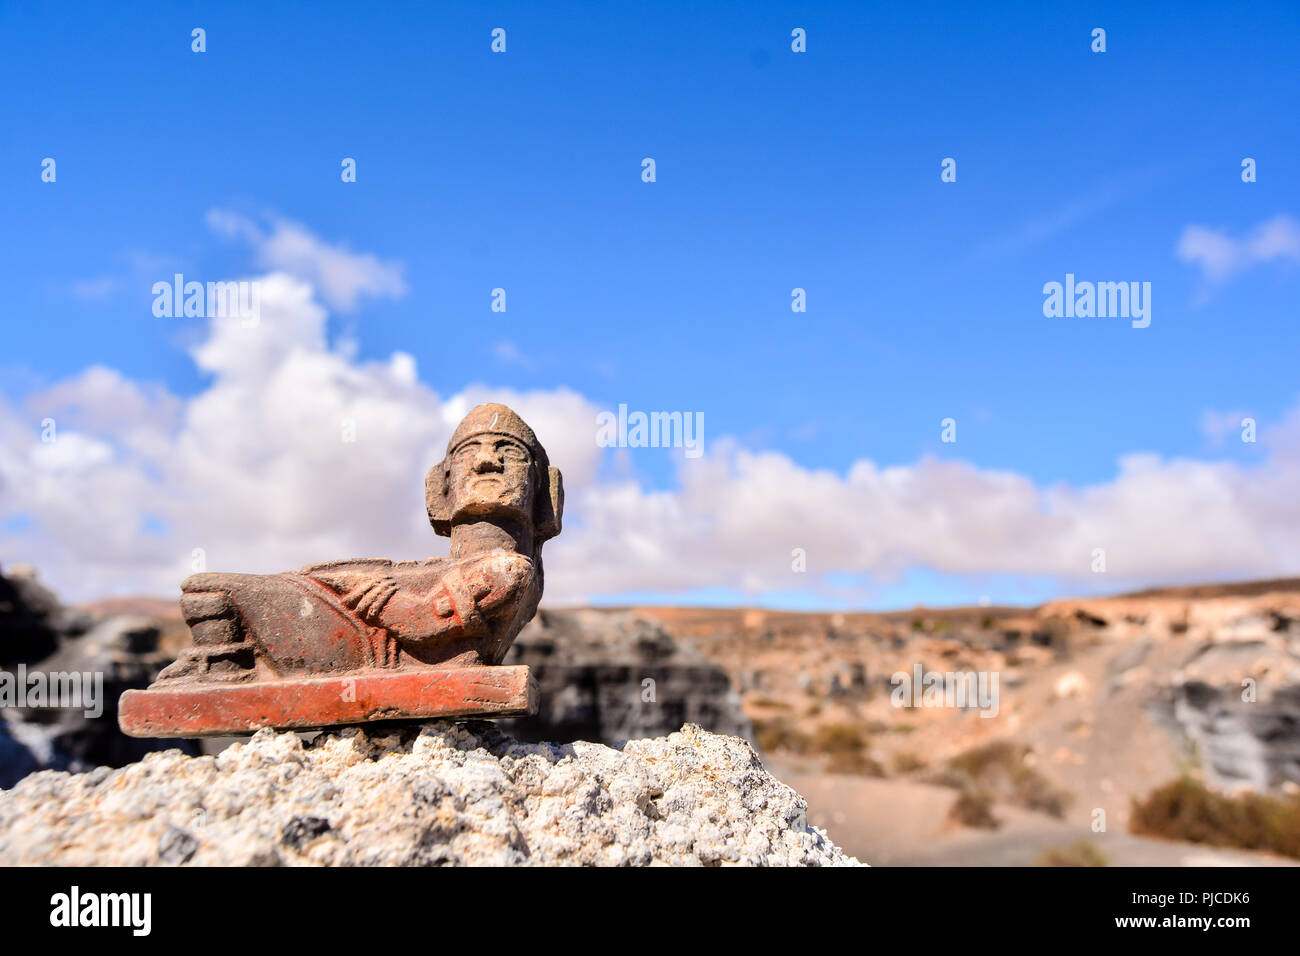 Conceptual Photo Picture of a Mayan Statue in the dry desert Stock Photo